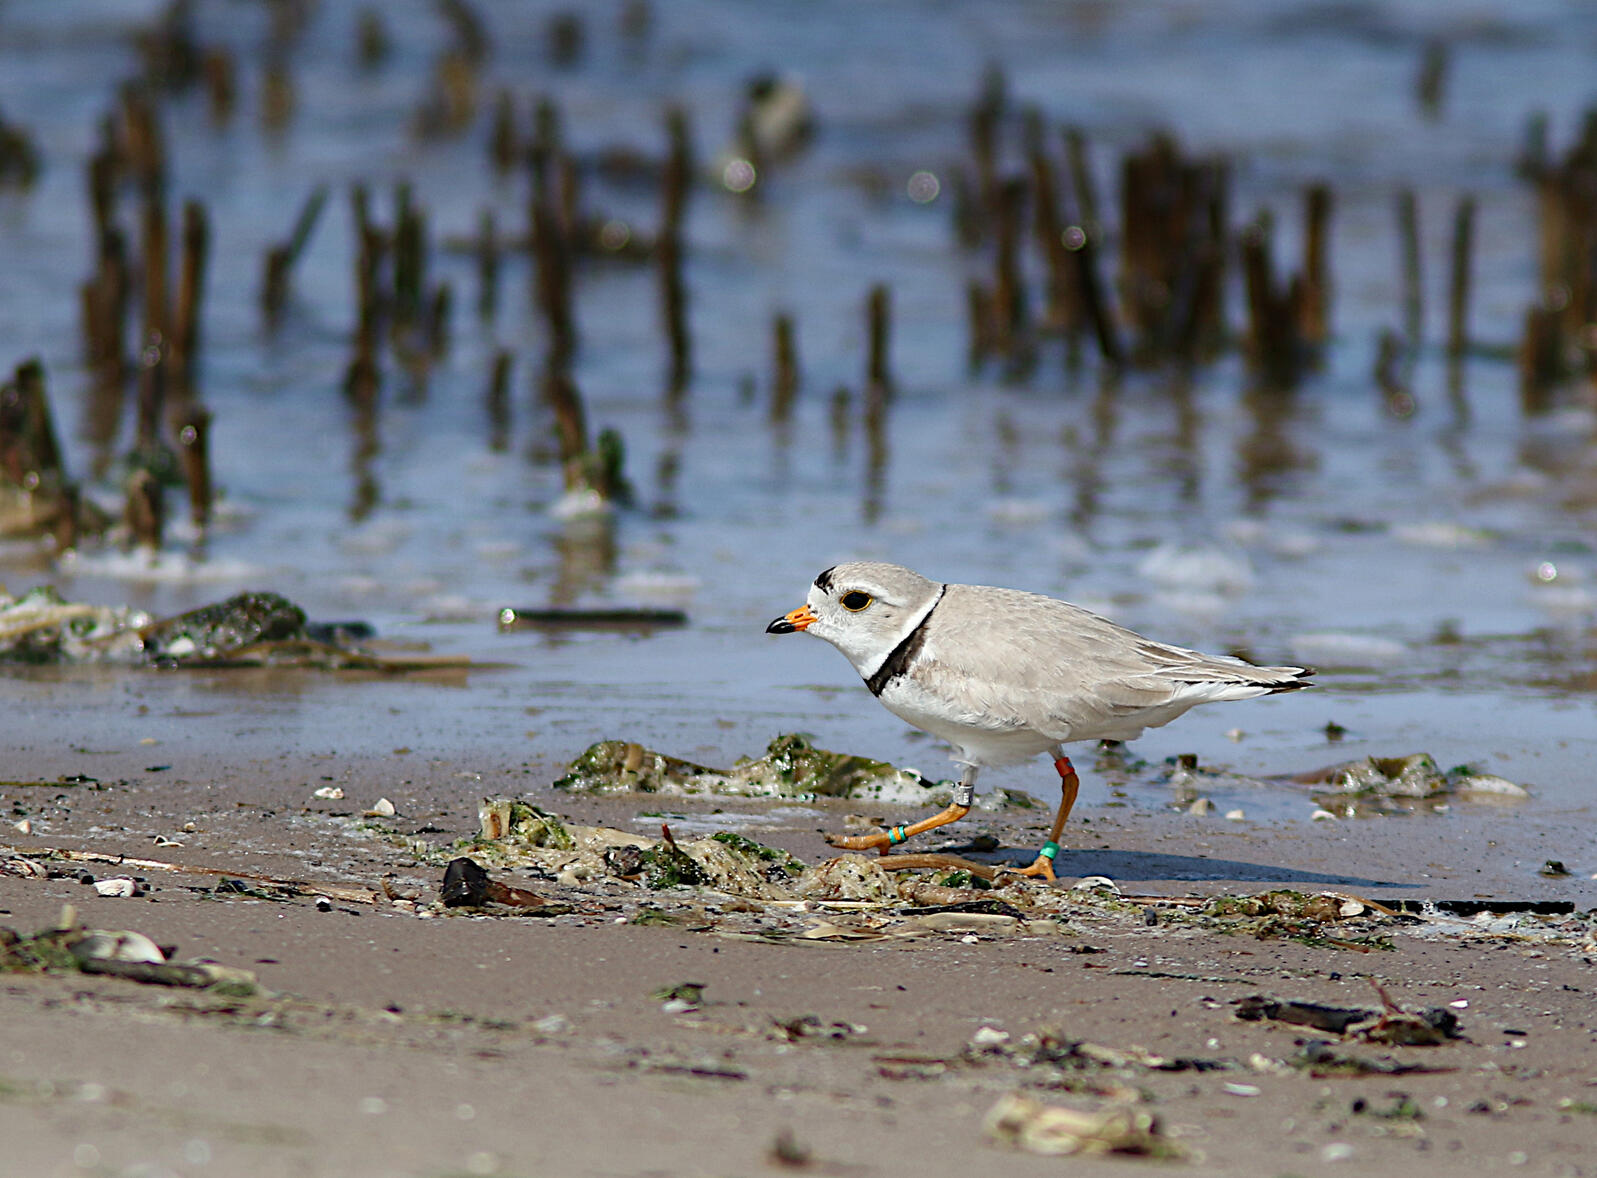 A male Great Lakes Piping Plover at Longtail Point in Lower Green Bay, WI. Photo: Tom Prestby/Audubon Great Lakes